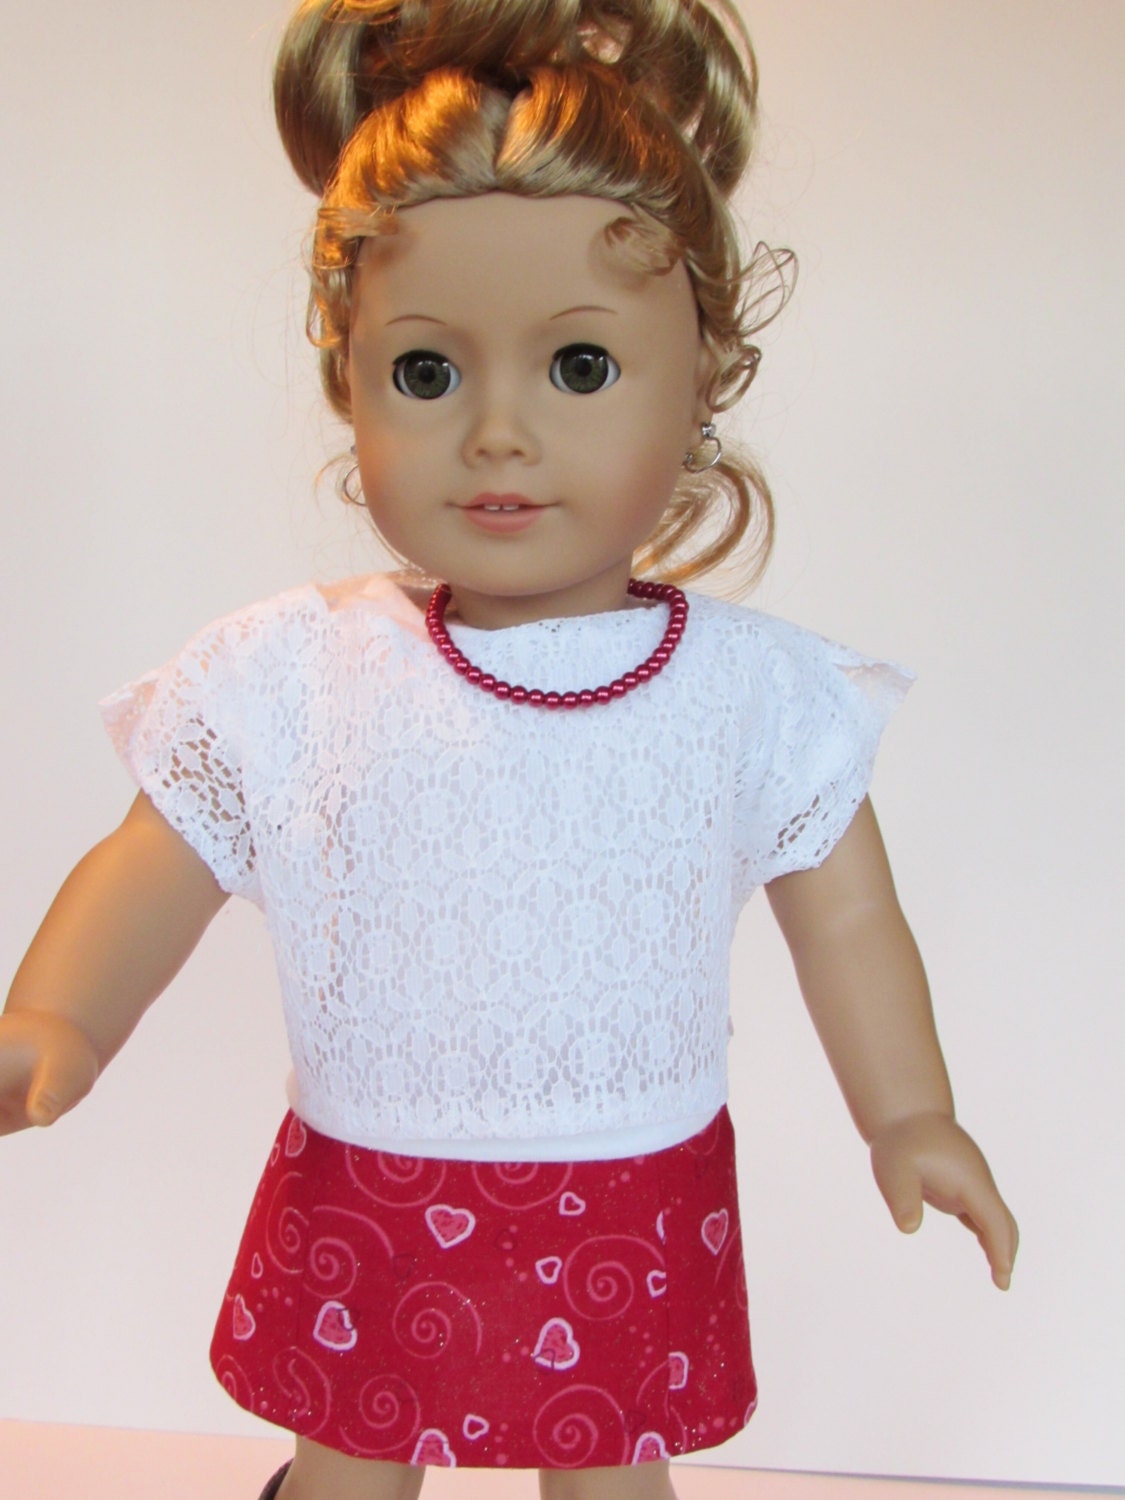 Handmade Doll Clothes for 18 inch doll Valentine Outfit fits